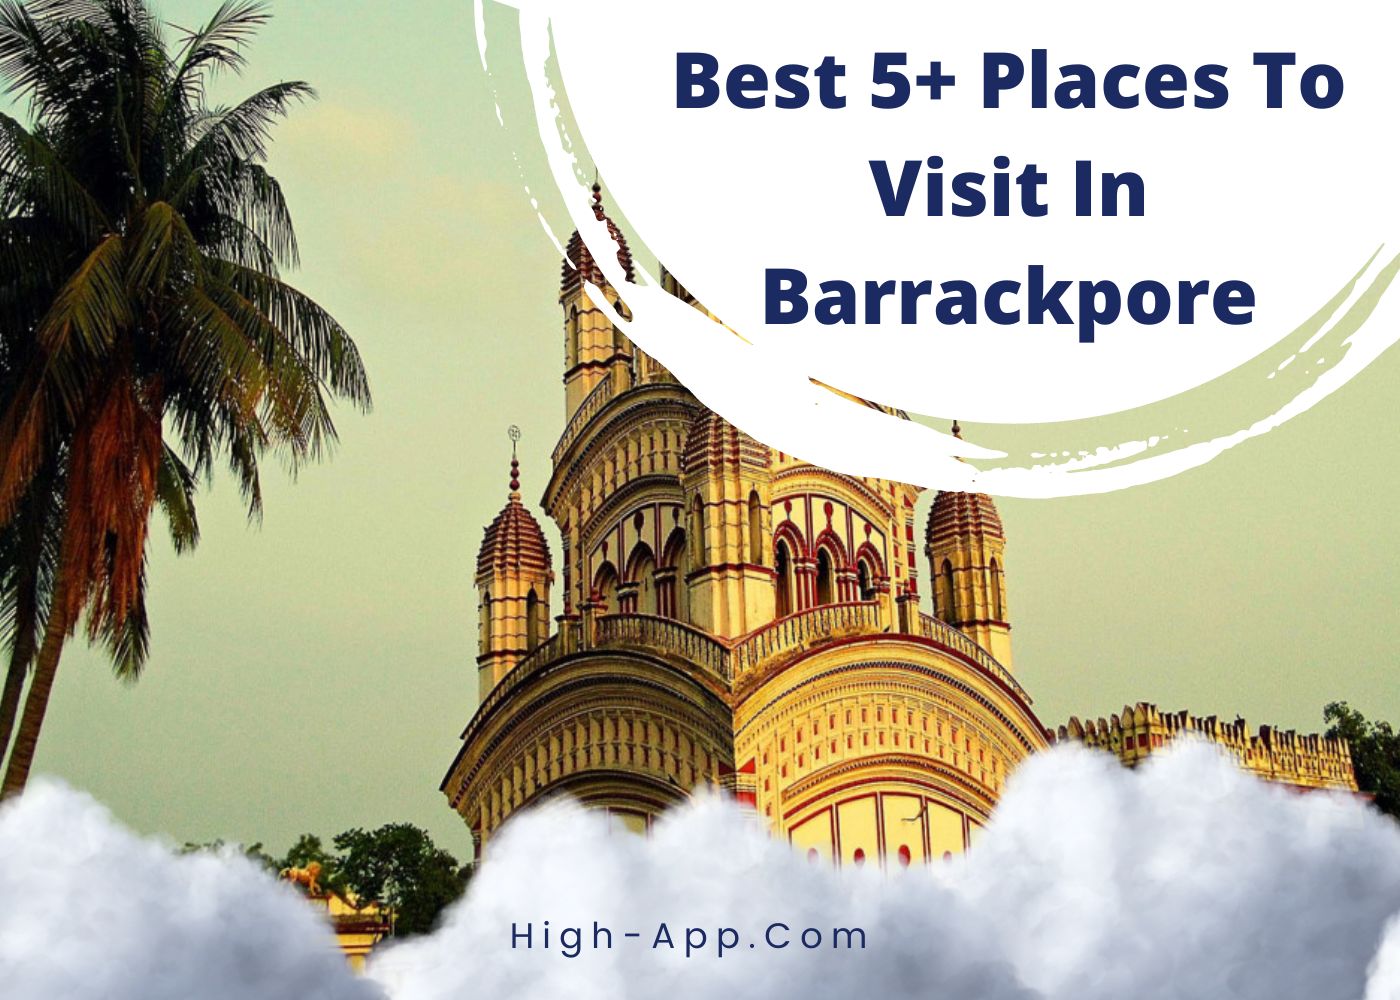 Best 5+ Places To Visit In Barrackpore